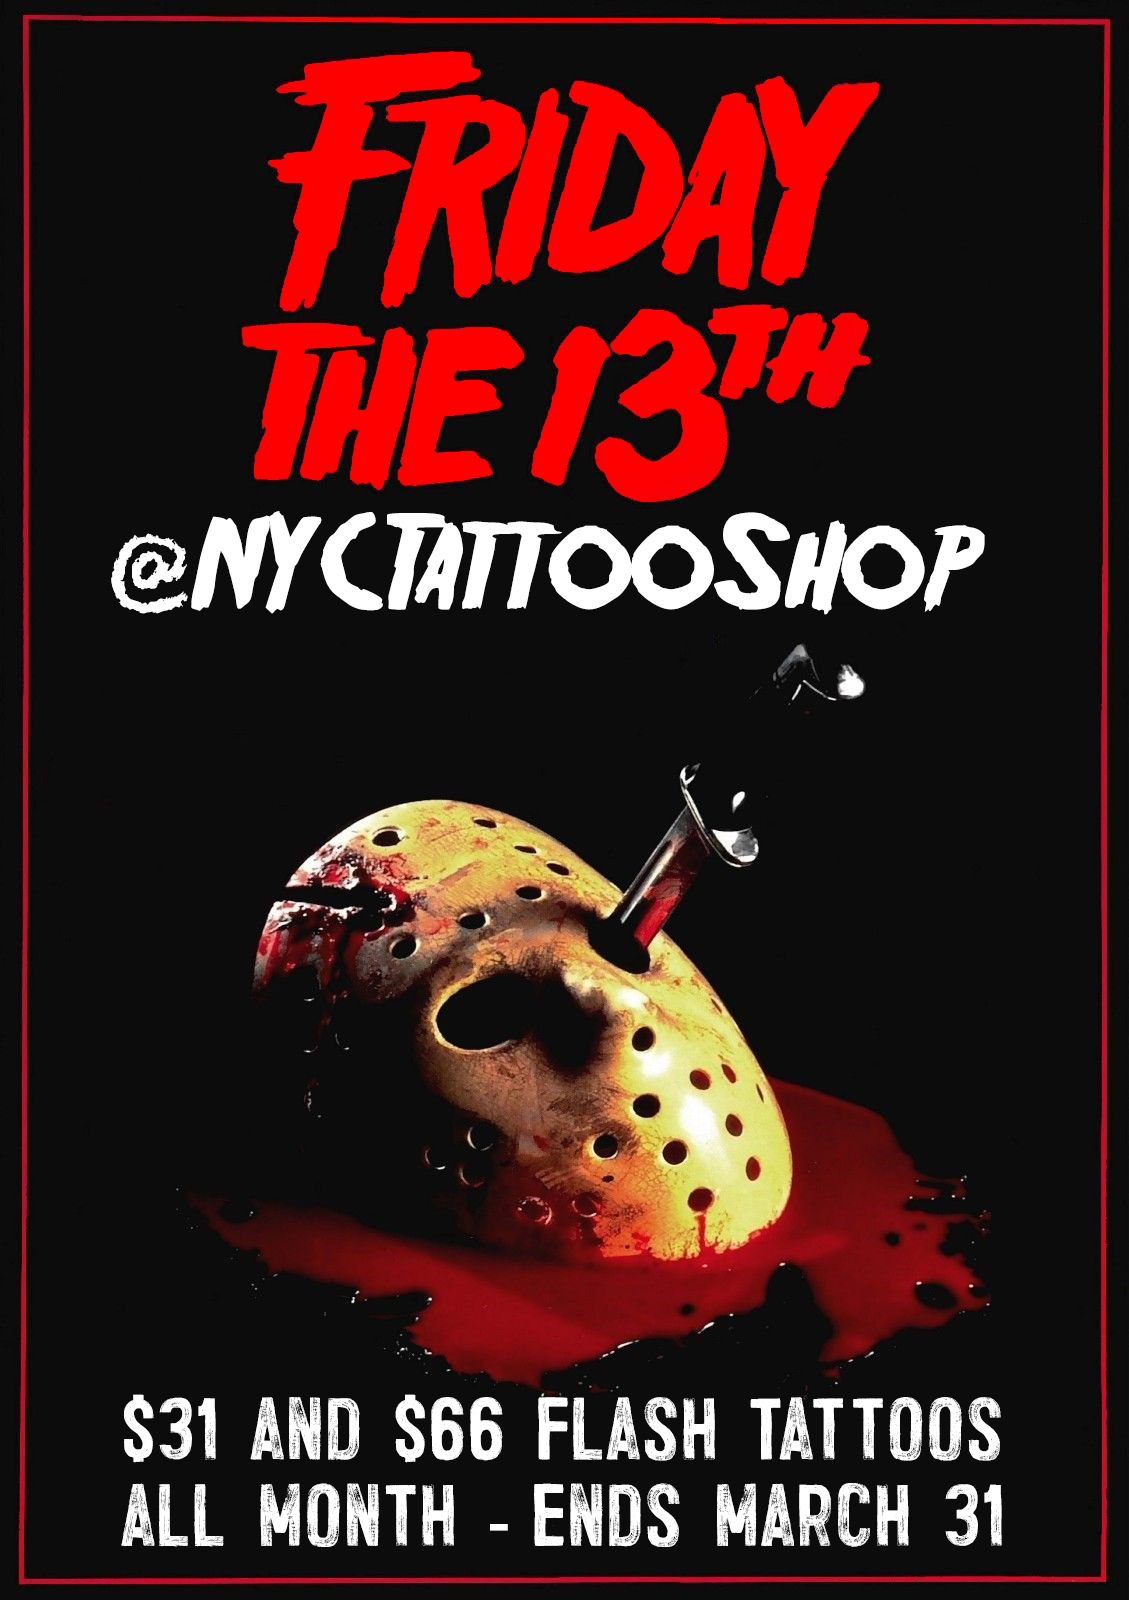 Brooklyn's Announces Friday the 13th Flash Tattoo Special